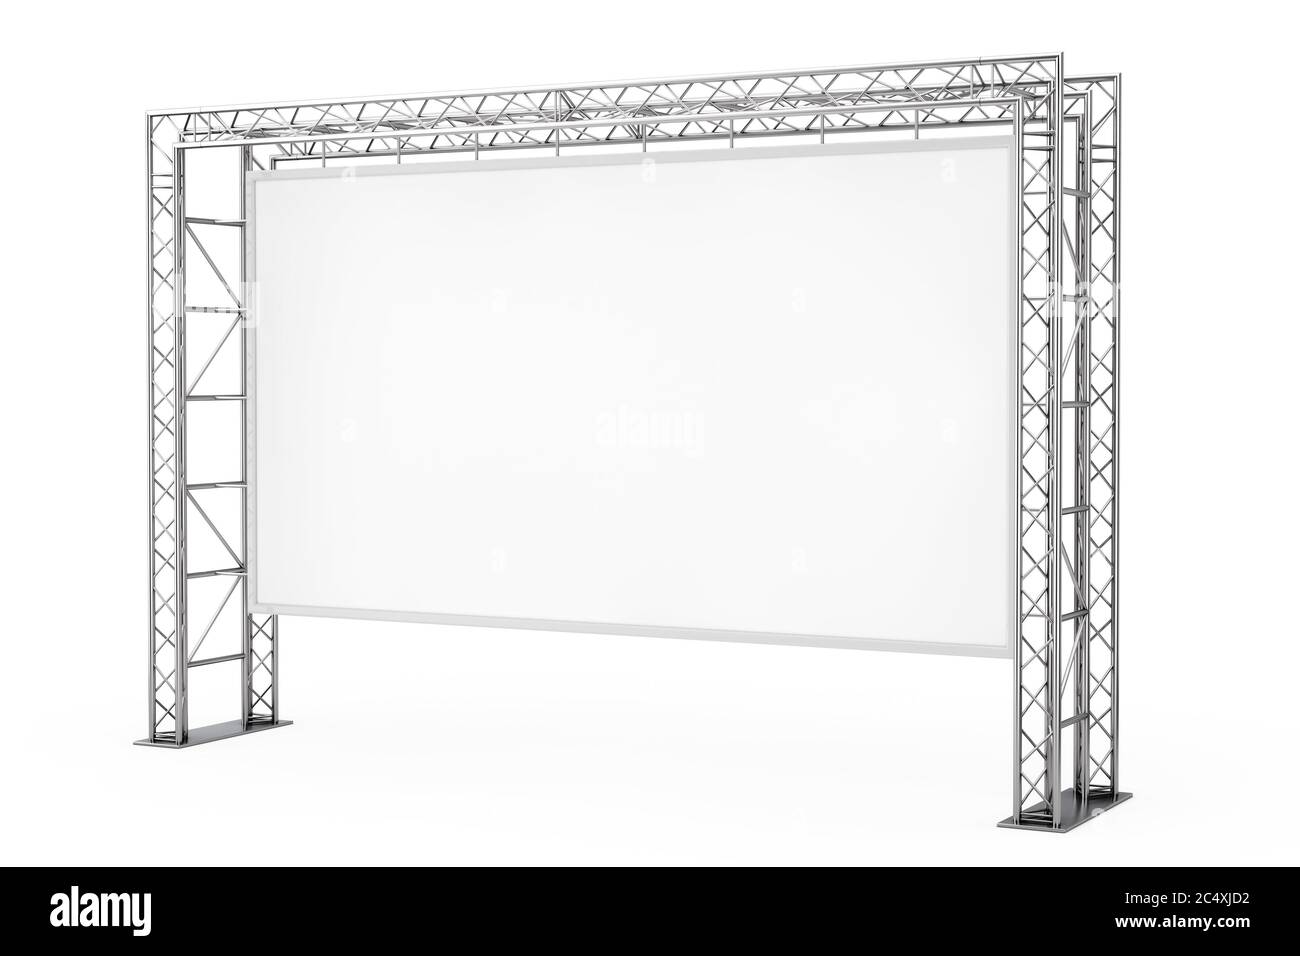 Blank Advertising Outdoor Banner On Metal Truss Construction System On A White Background 3d Rendering Stock Photo Alamy